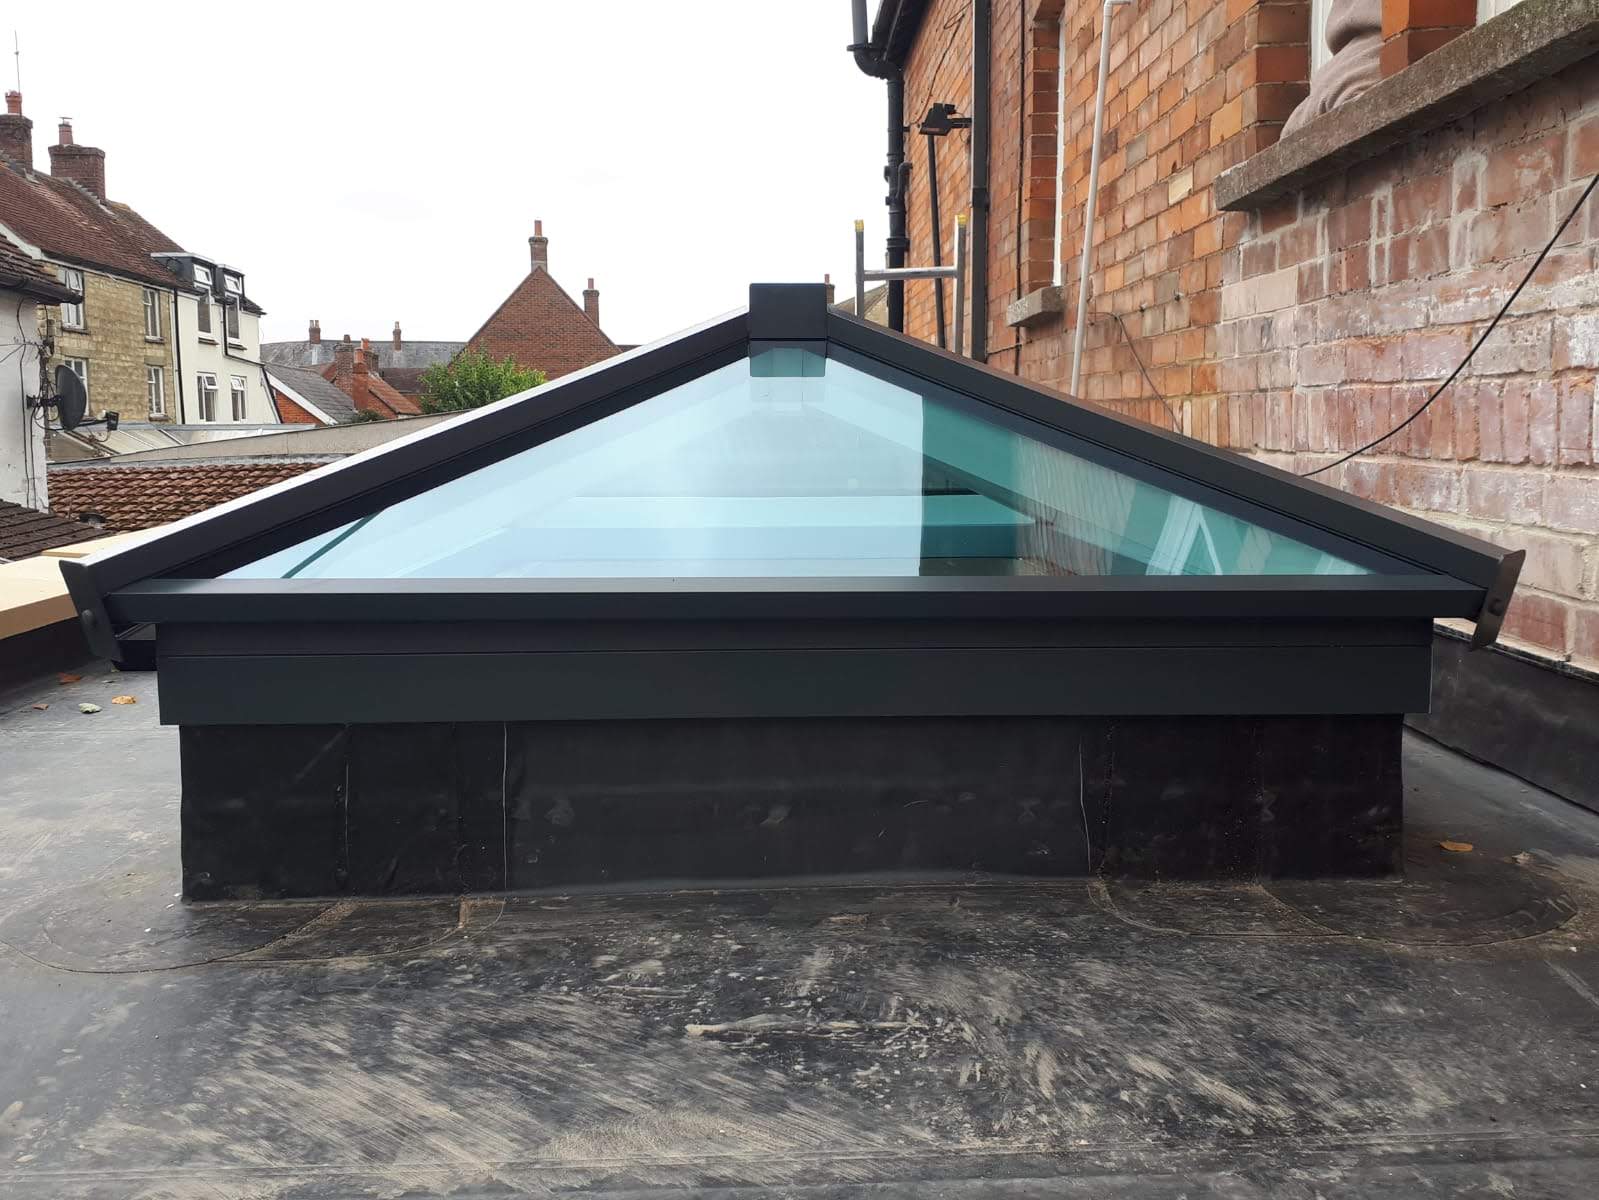 Front image of a roof skylight design.